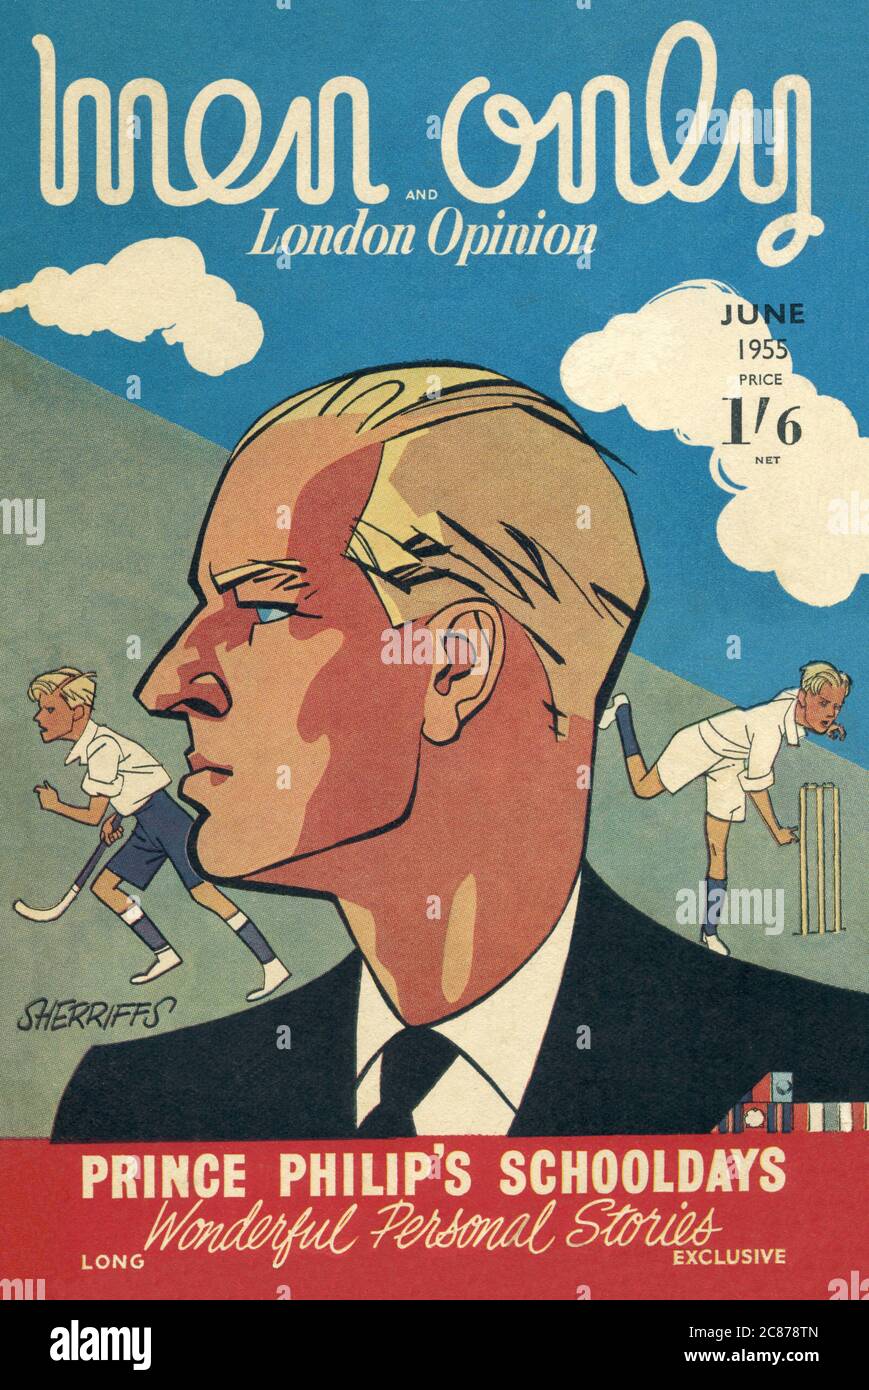 The front cover of Men Only and London Opinion magazine - June, 1955 - Prince Philip's Schooldays, featuring 'wonderful personal stories'.     Date: 1955 Stock Photo